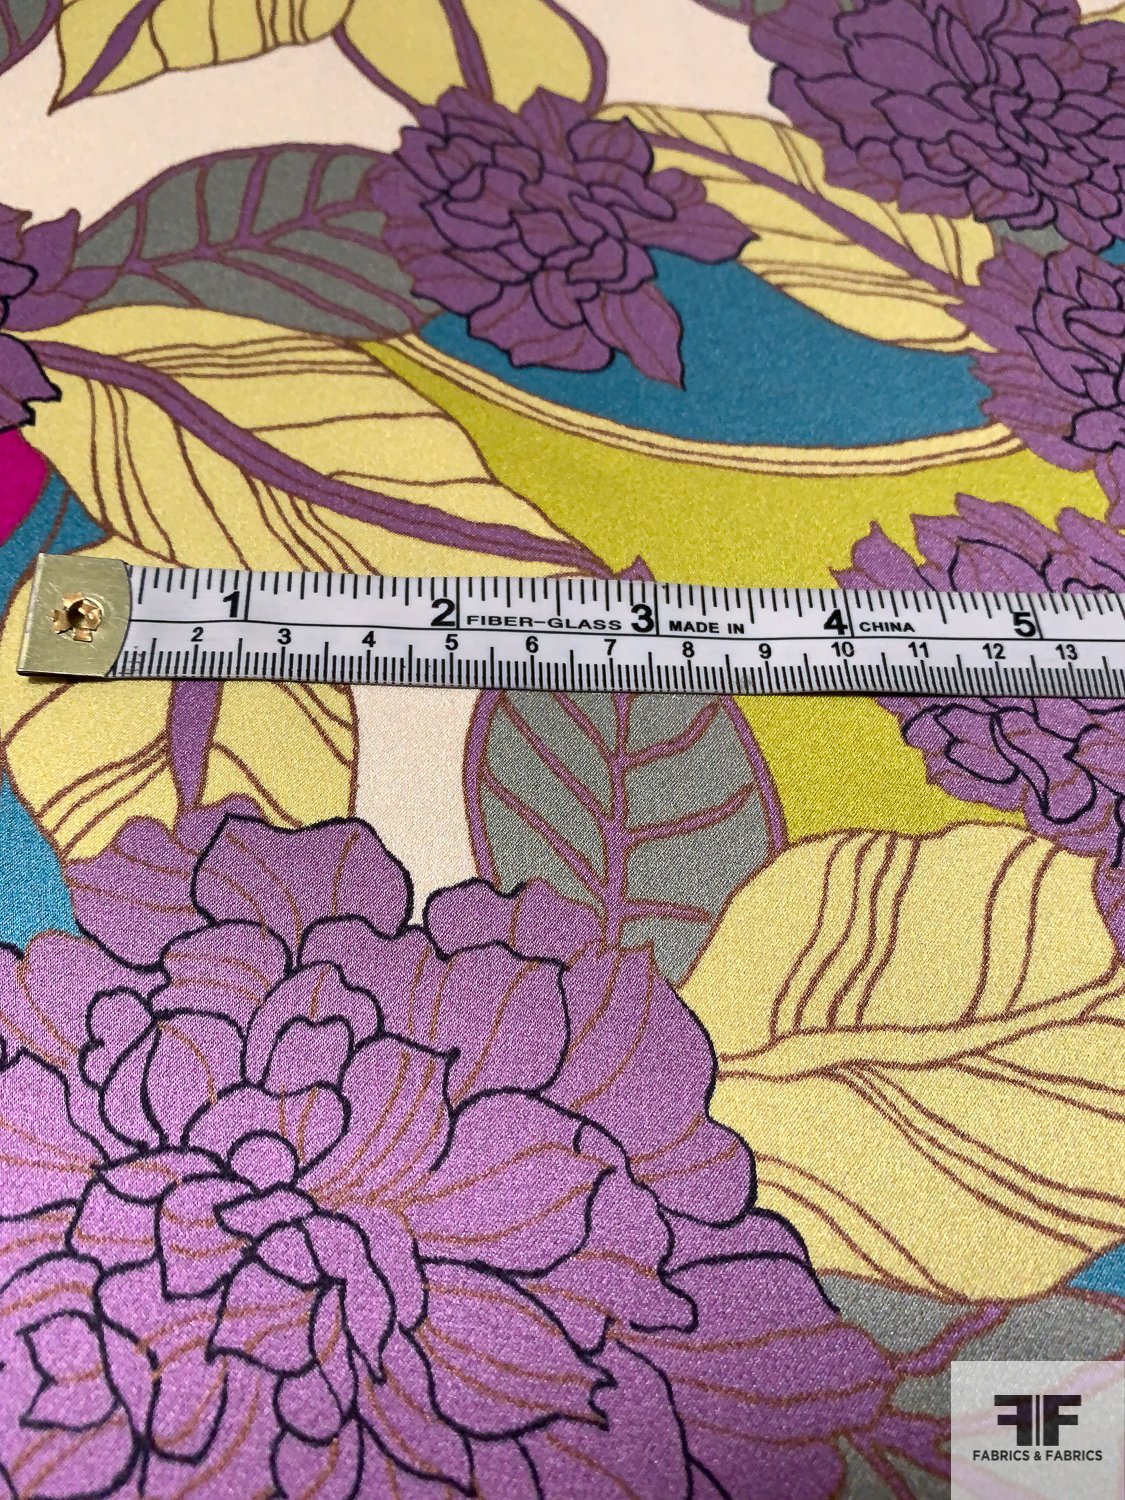 Tropical Floral Printed Silk Charmeuse - Purple / Turquoise / Yellow / Greens